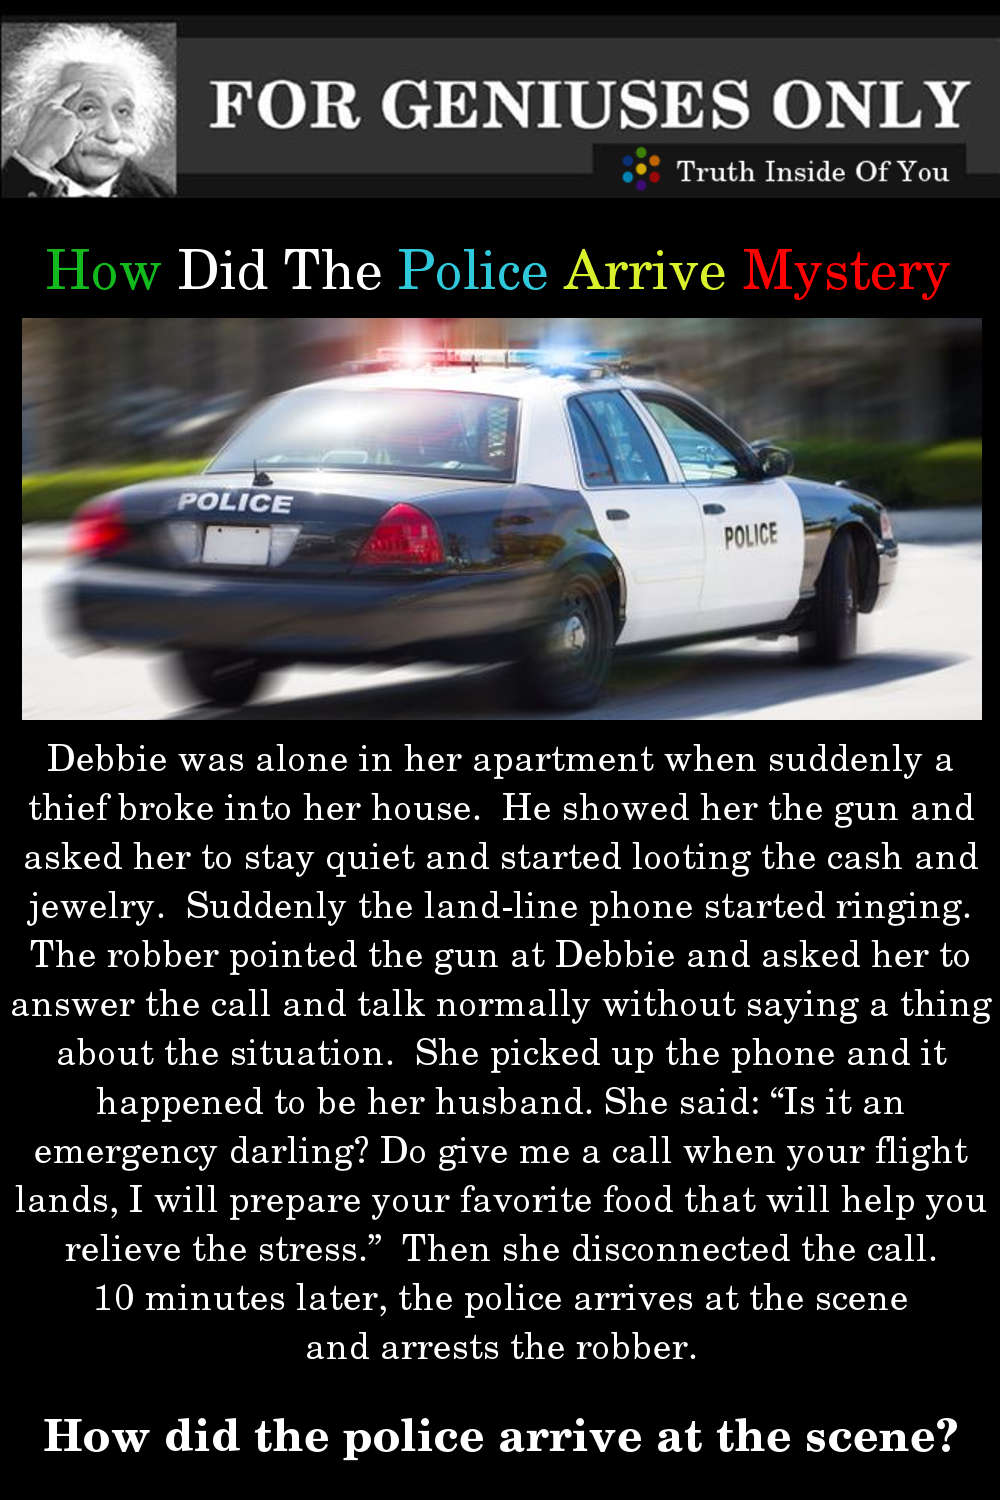 Riddle: How Did The Police Arrive?